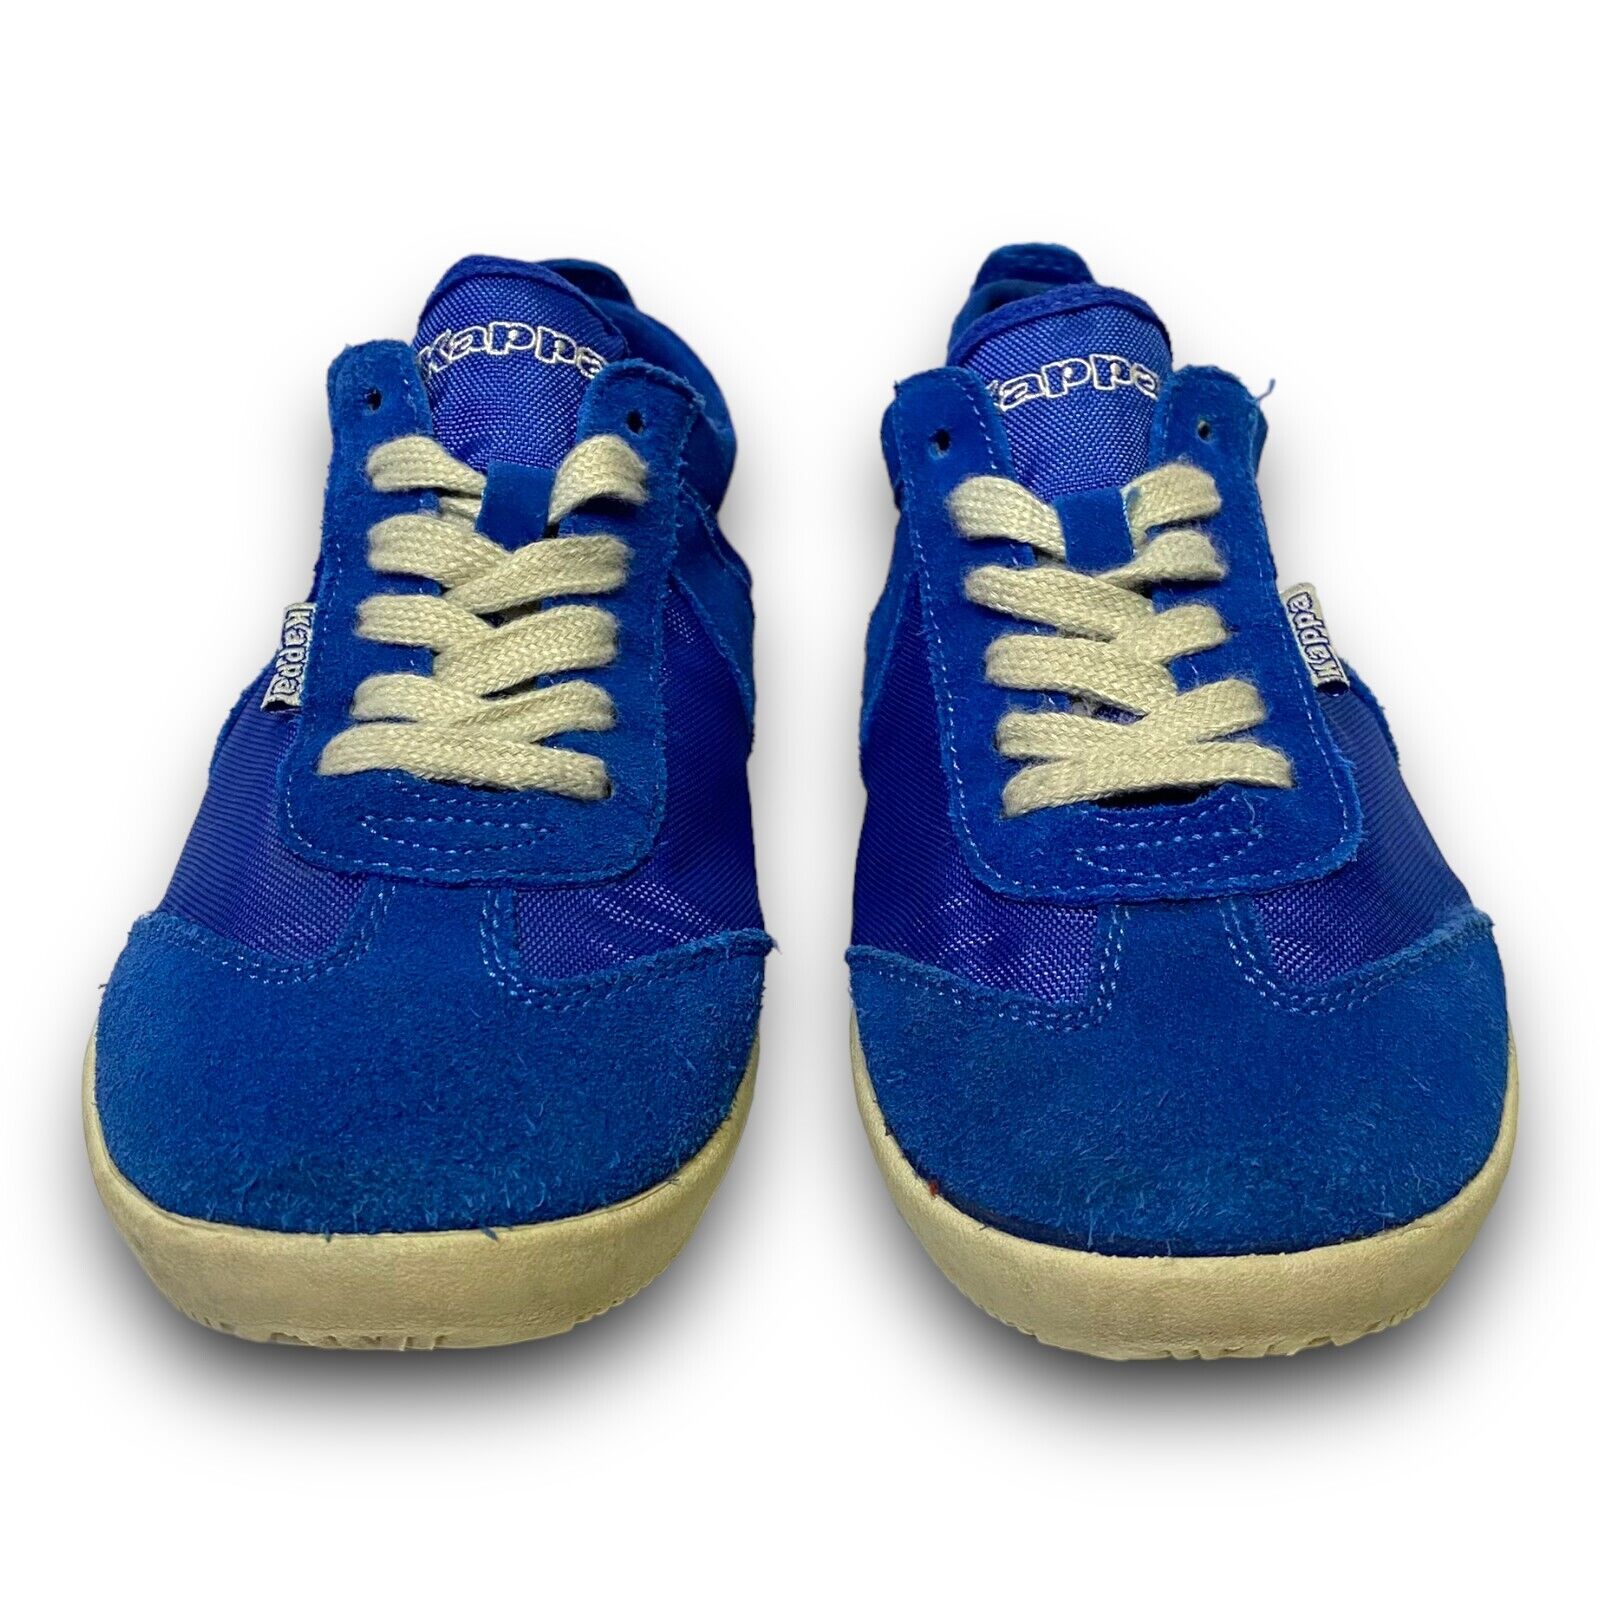 Kappa Mens US 7 Logo Lace Shoes | Blue Suede Size Rare Sneakers Vintage Up 90s eBay